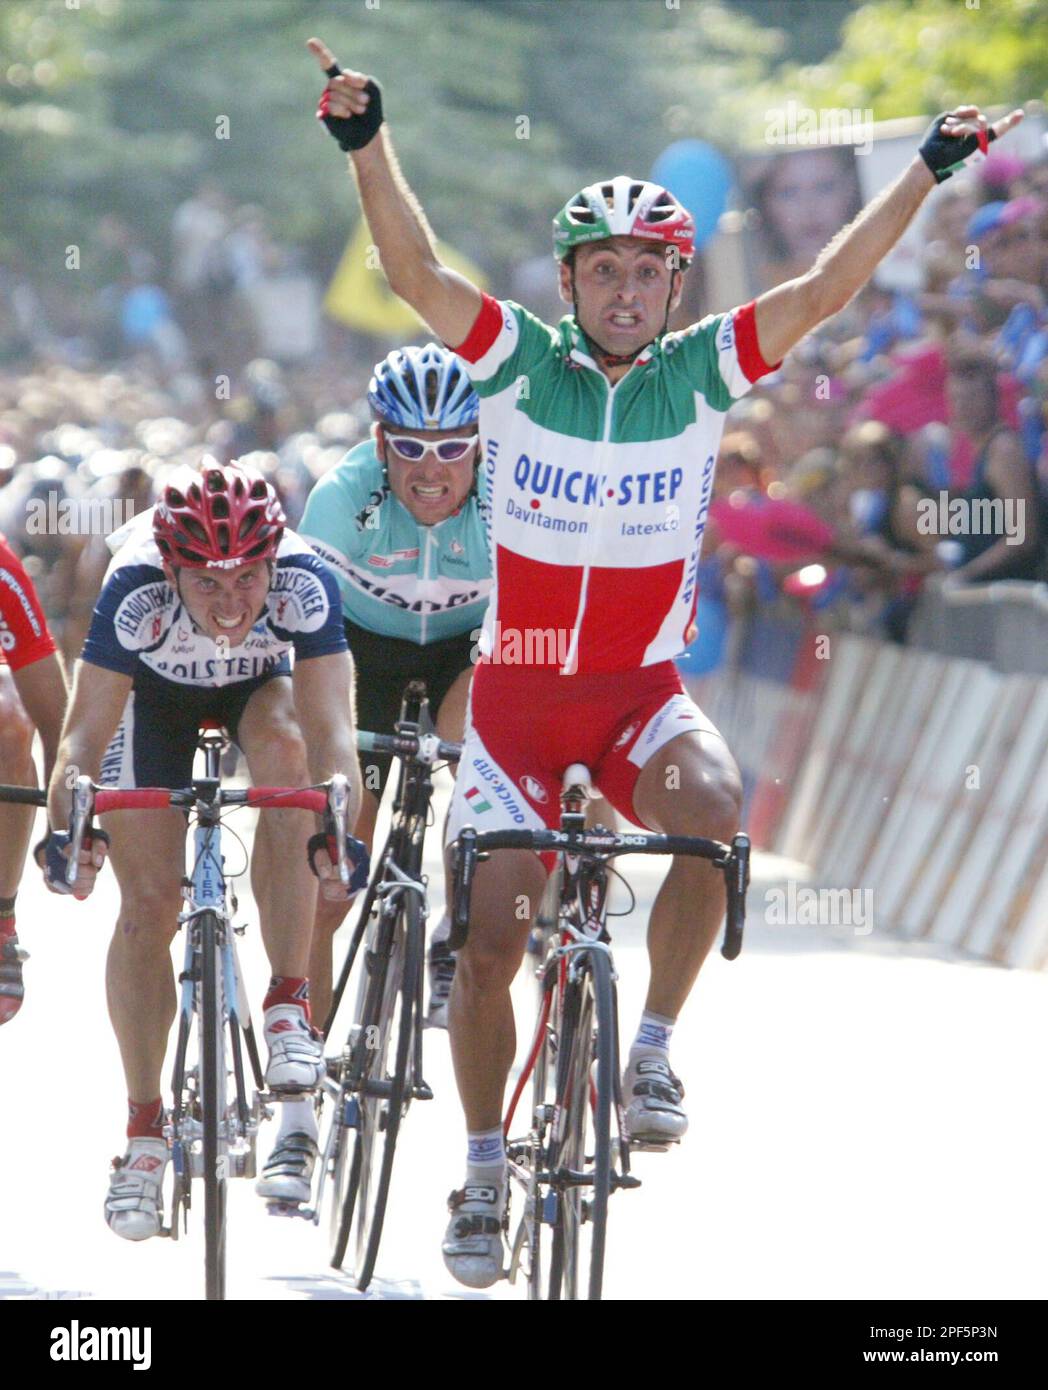 Italy's Olympic champion Paolo Bettini, left, looks at his